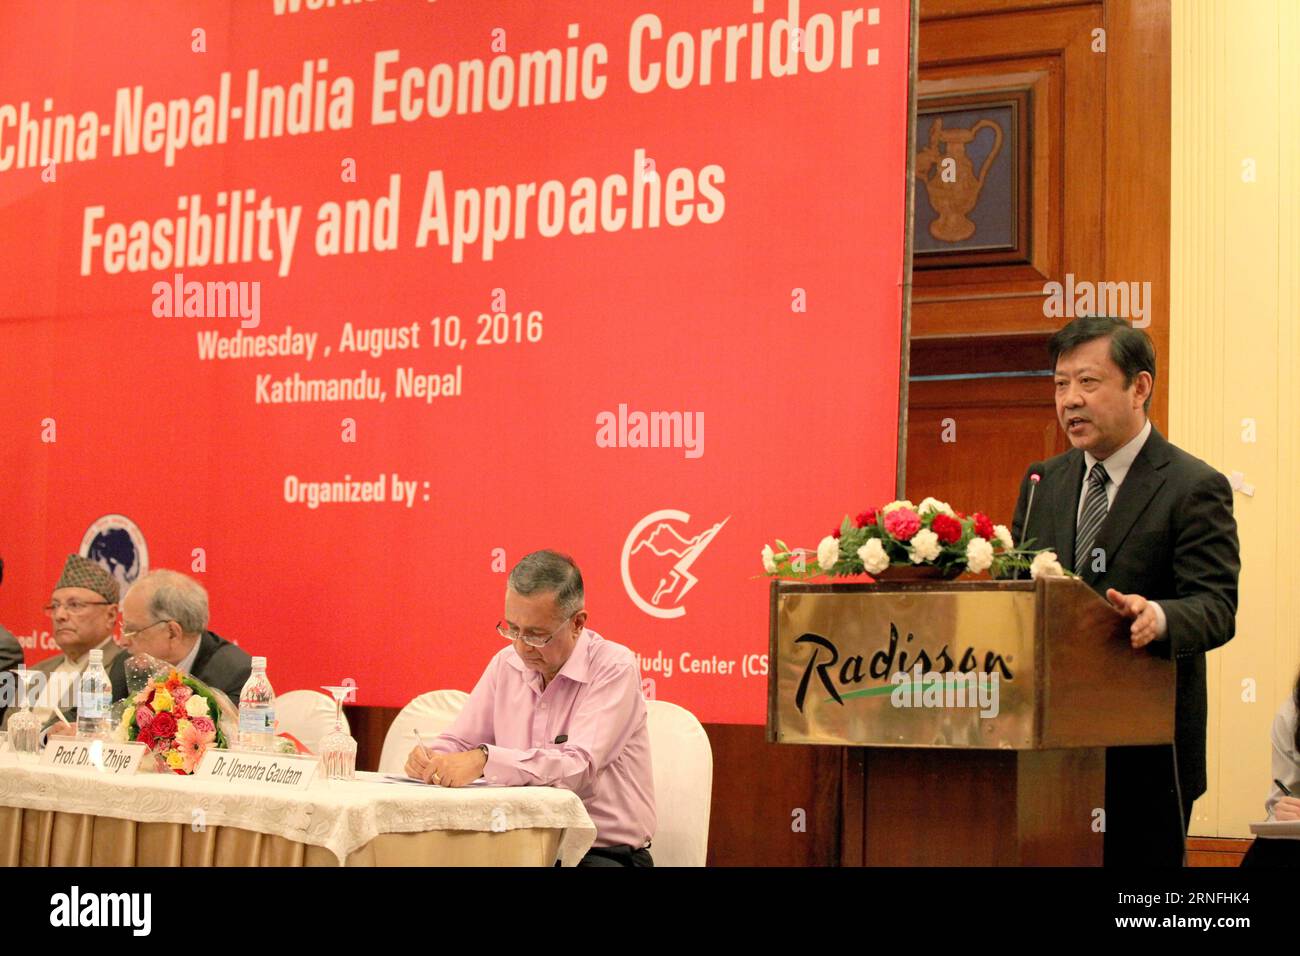 (160810) -- KATHMANDU, Aug. 10, 2016 -- Ji Zhiye, president of China Institutes of Contemporary International Relations (R), addresses the China-Nepal-India Economic Corridor: Feasibility and Approaches workshop in Kathmandu, Nepal, Aug. 10, 2016. The establishment of a China-Nepal-India economic corridor will help secure economic prosperity of the entire Asian region through enhancing cooperation on trade, tourism, energy and connectivity, experts said here on Wednesday. ) (zjy) NEPAL-KATHMANDU-CHINA-NEPAL-INDIA-ECONOMIC CORRIDOR-WORKSHOP ZhouxShengping PUBLICATIONxNOTxINxCHN   160810 Kathman Stock Photo